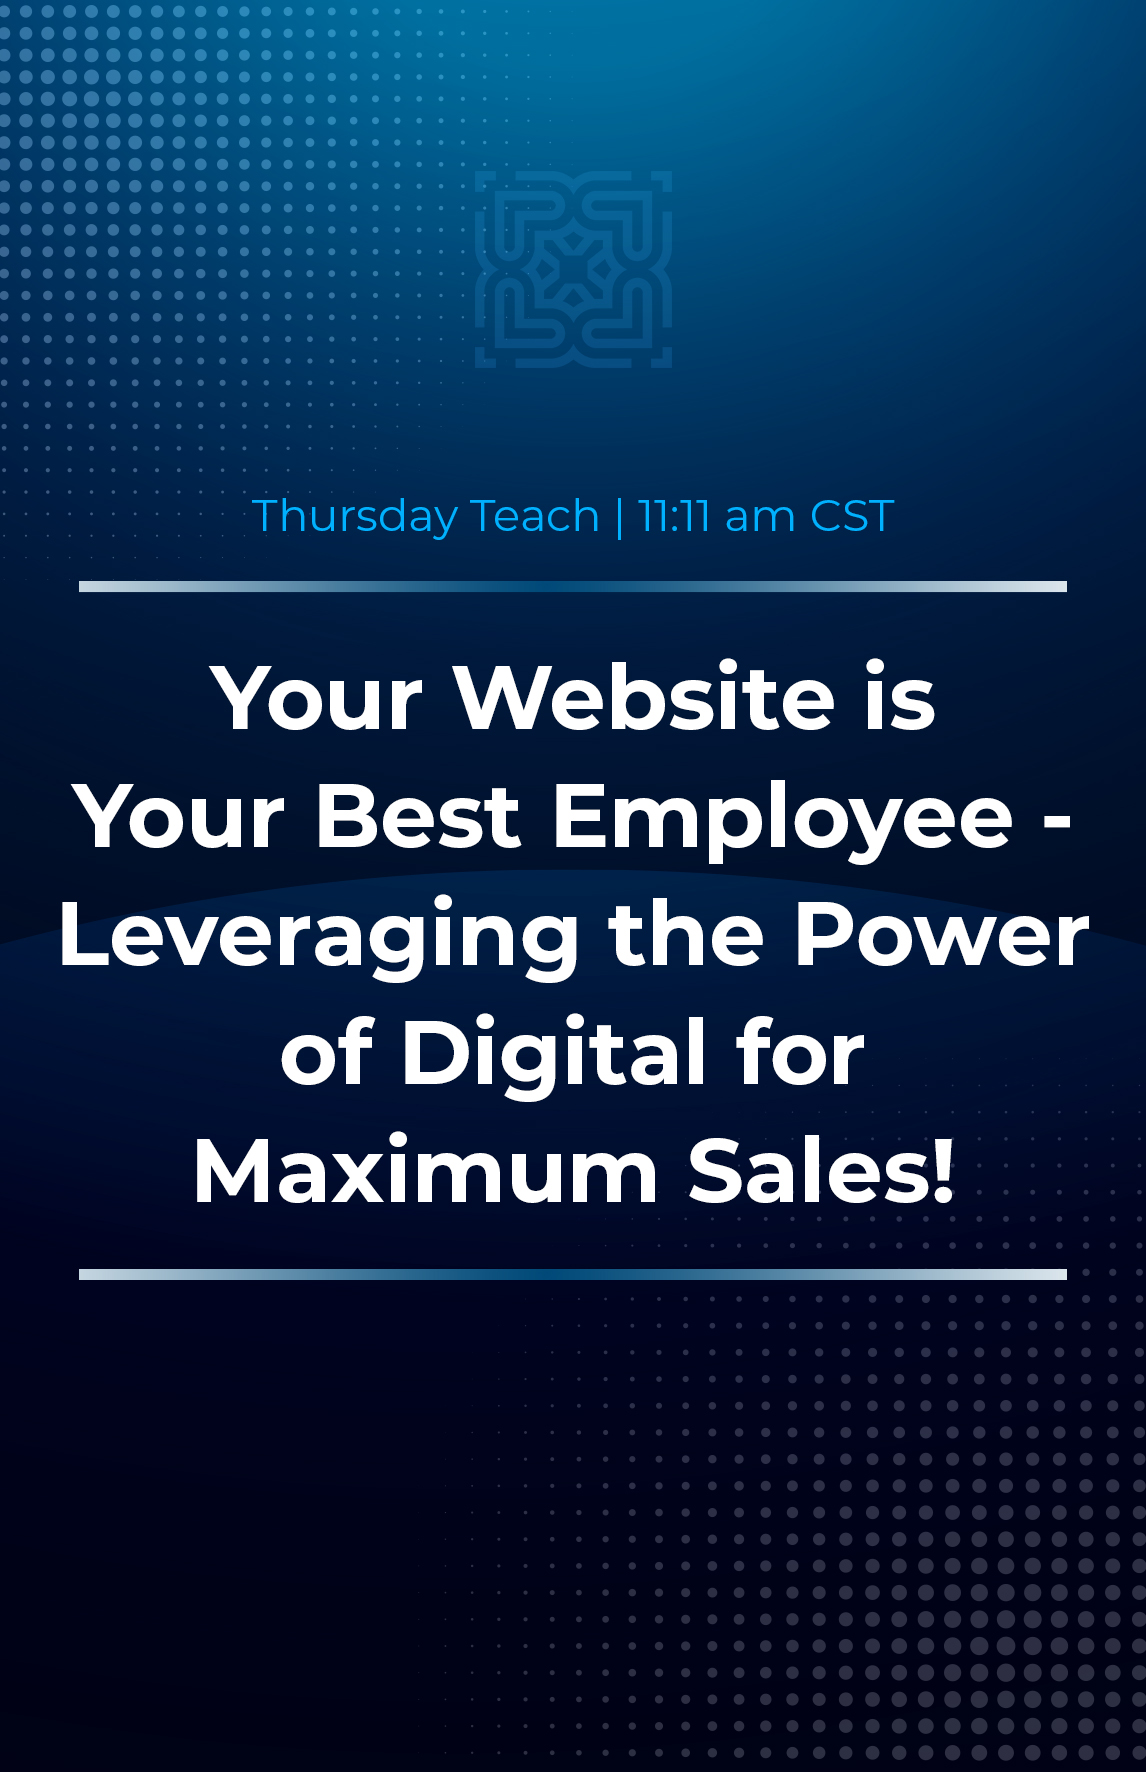 Your Website is Your Best Employee - Leveraging the Power of Digital for Maximum Sales!